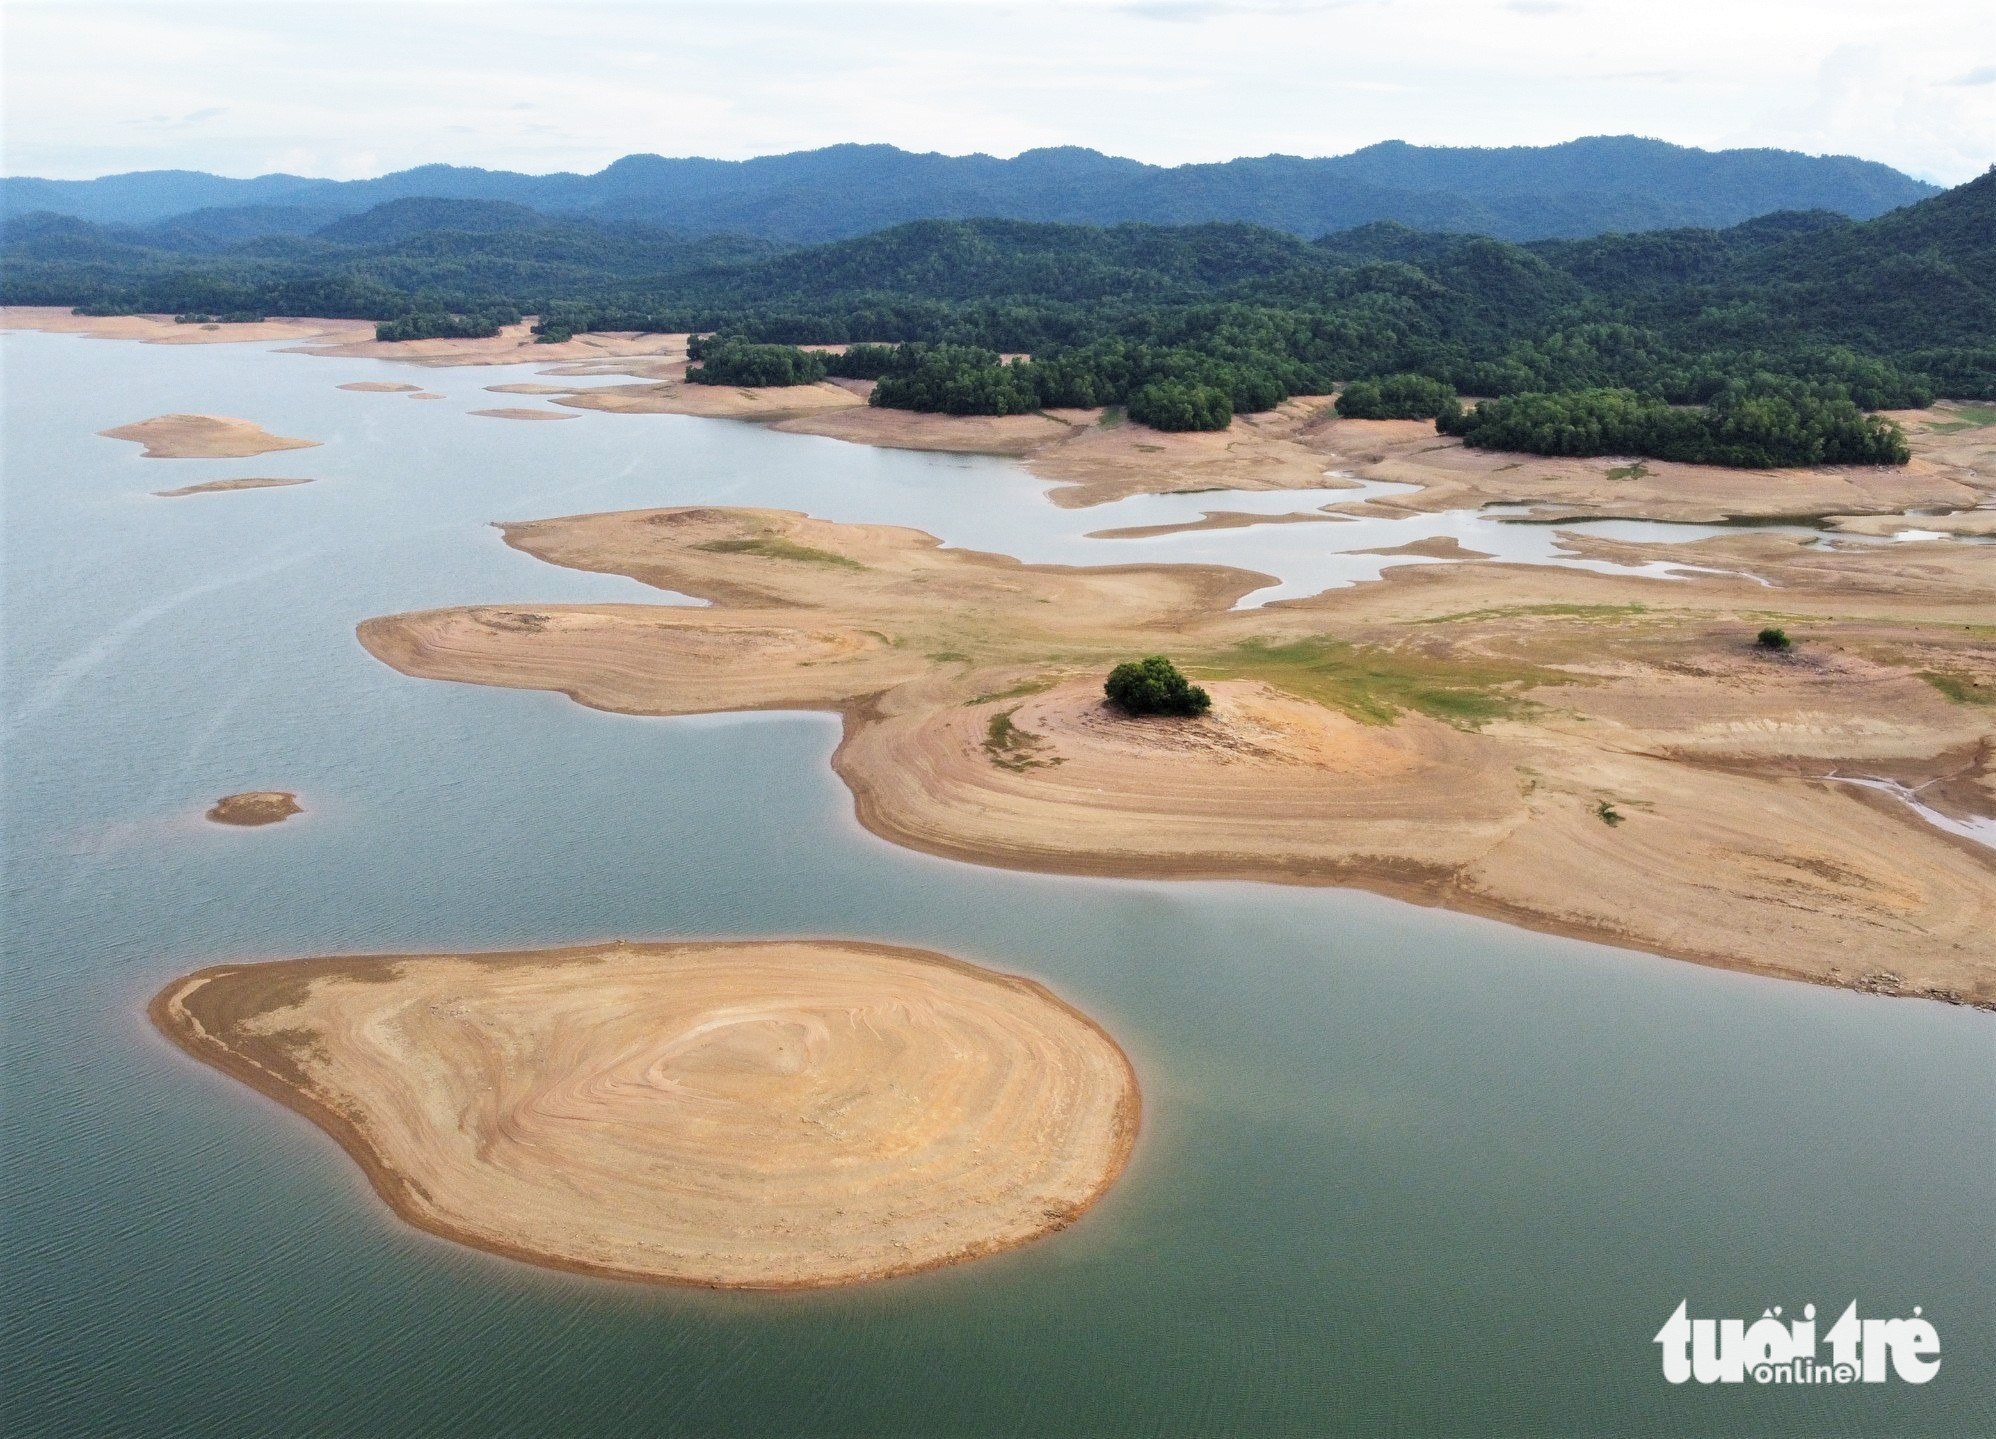 Water levels in north-central Vietnam’s major irrigation dam critically low